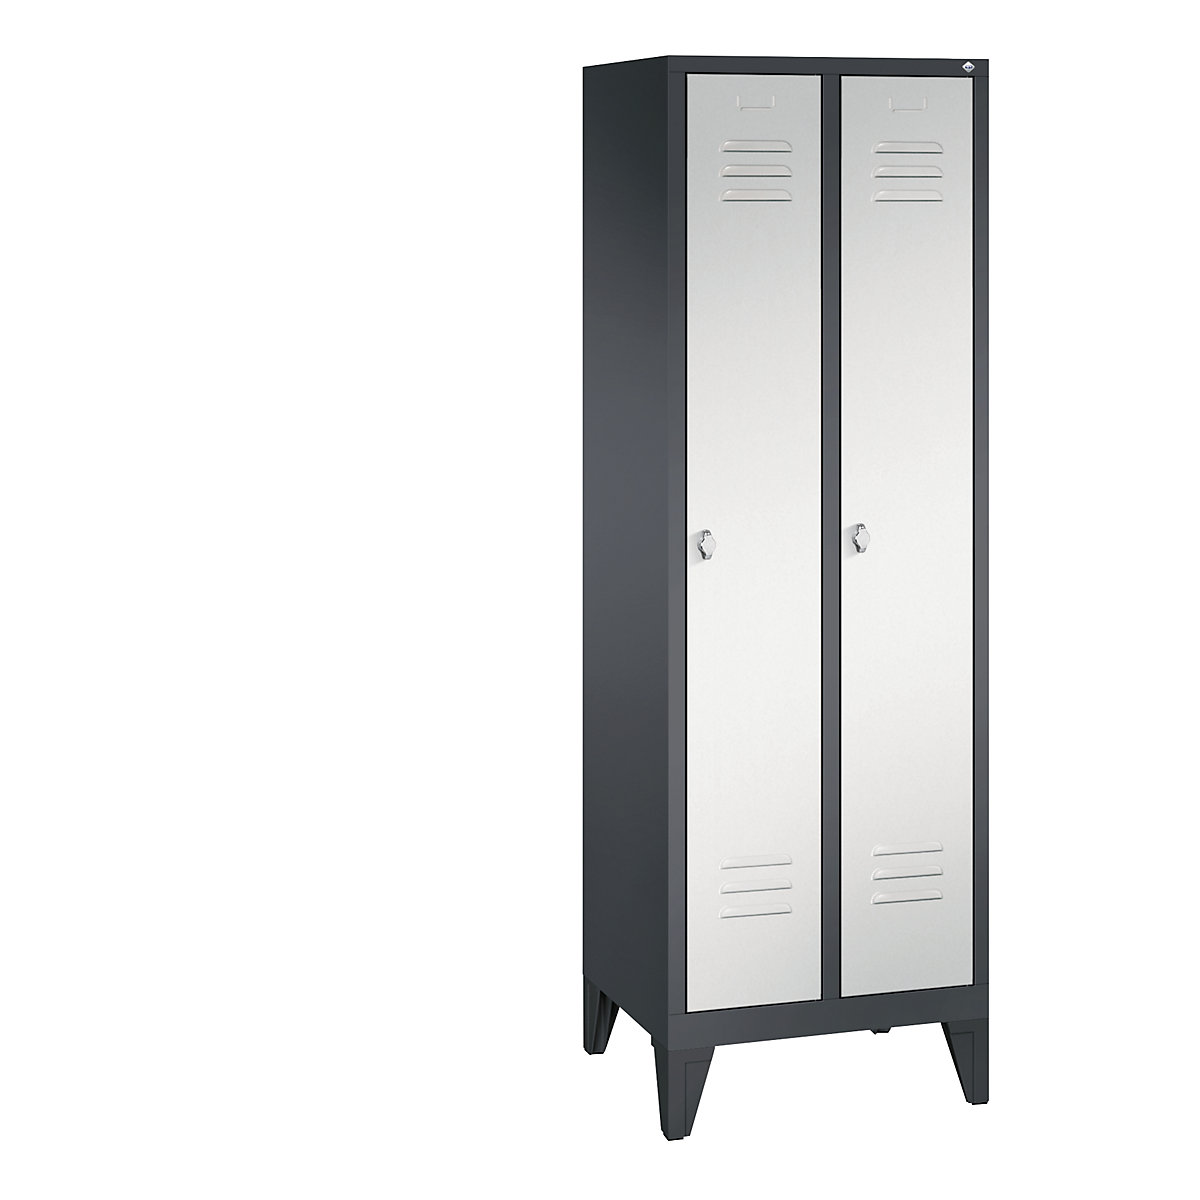 CLASSIC cloakroom locker with feet – C+P, 2 compartments, compartment width 300 mm, black grey / light grey-11